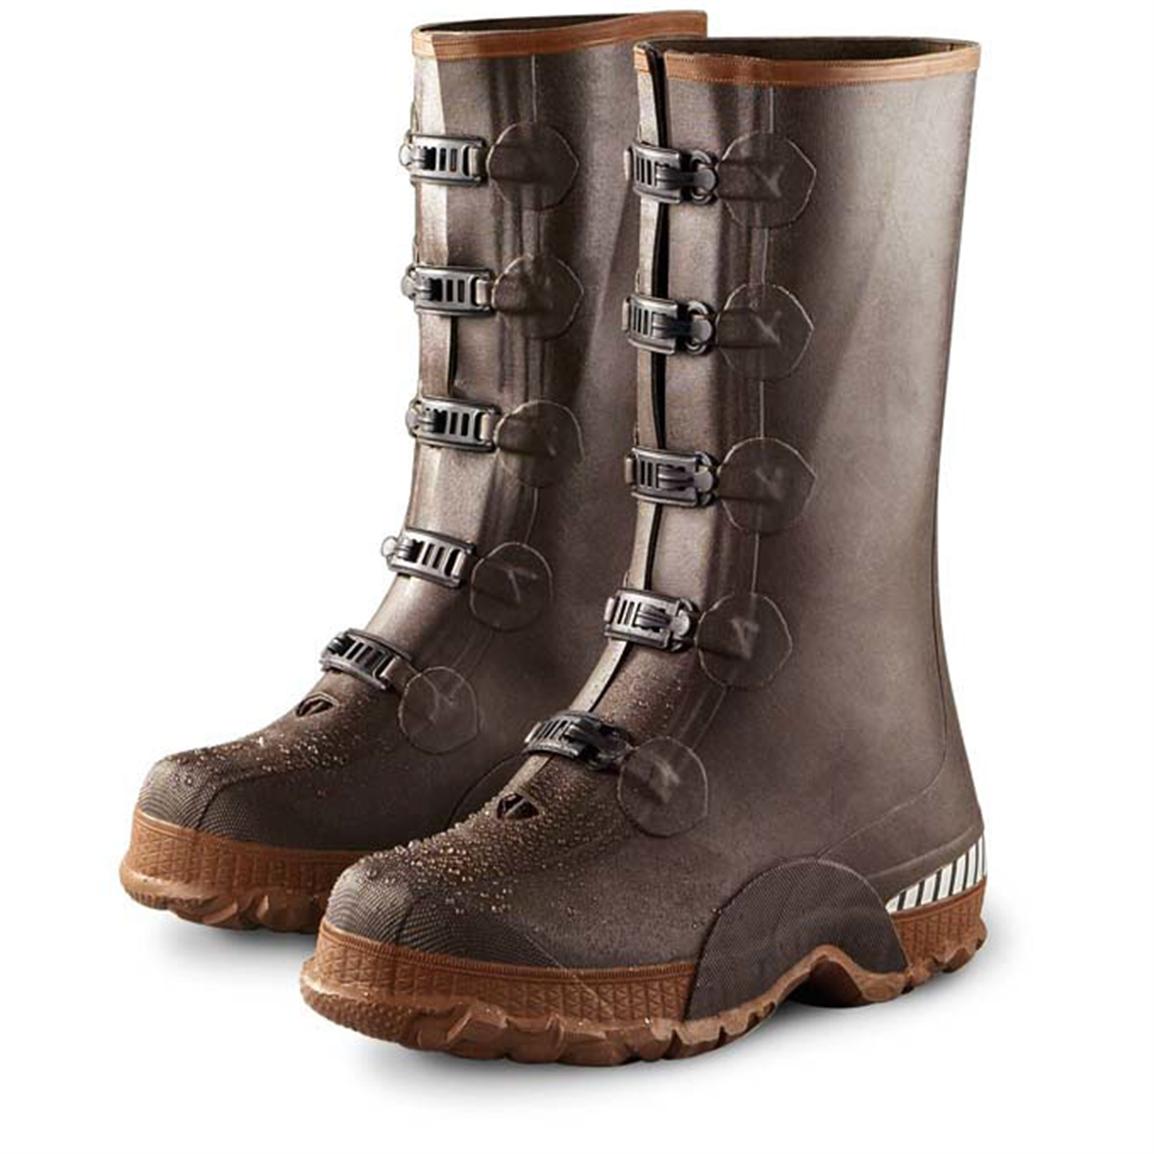 5 buckle overboots